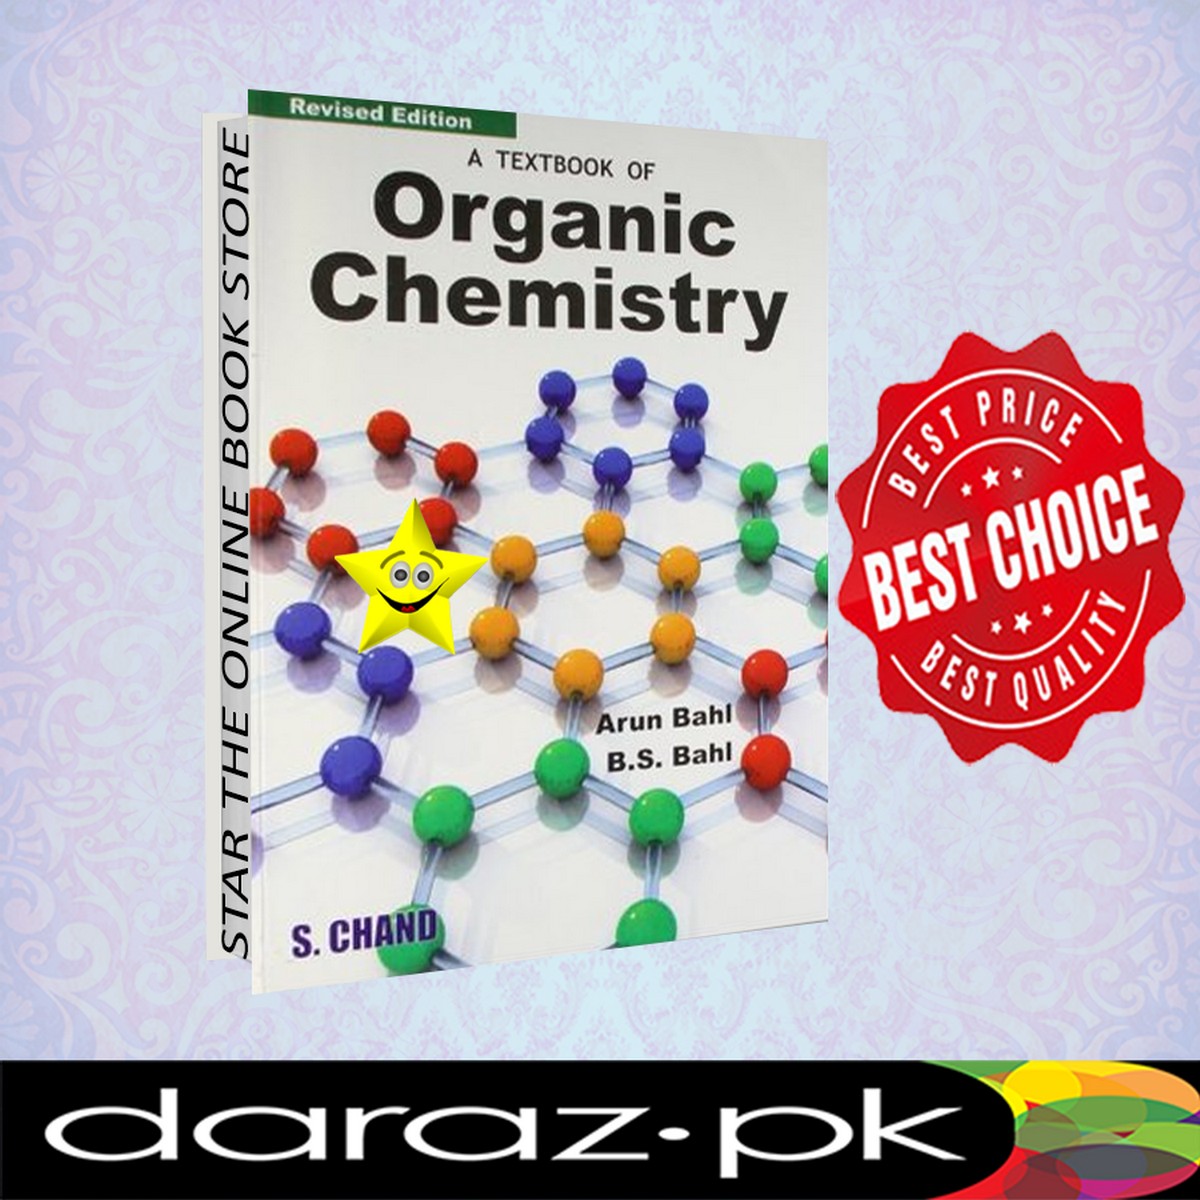 bahl and arun bahl organic chemistry free download